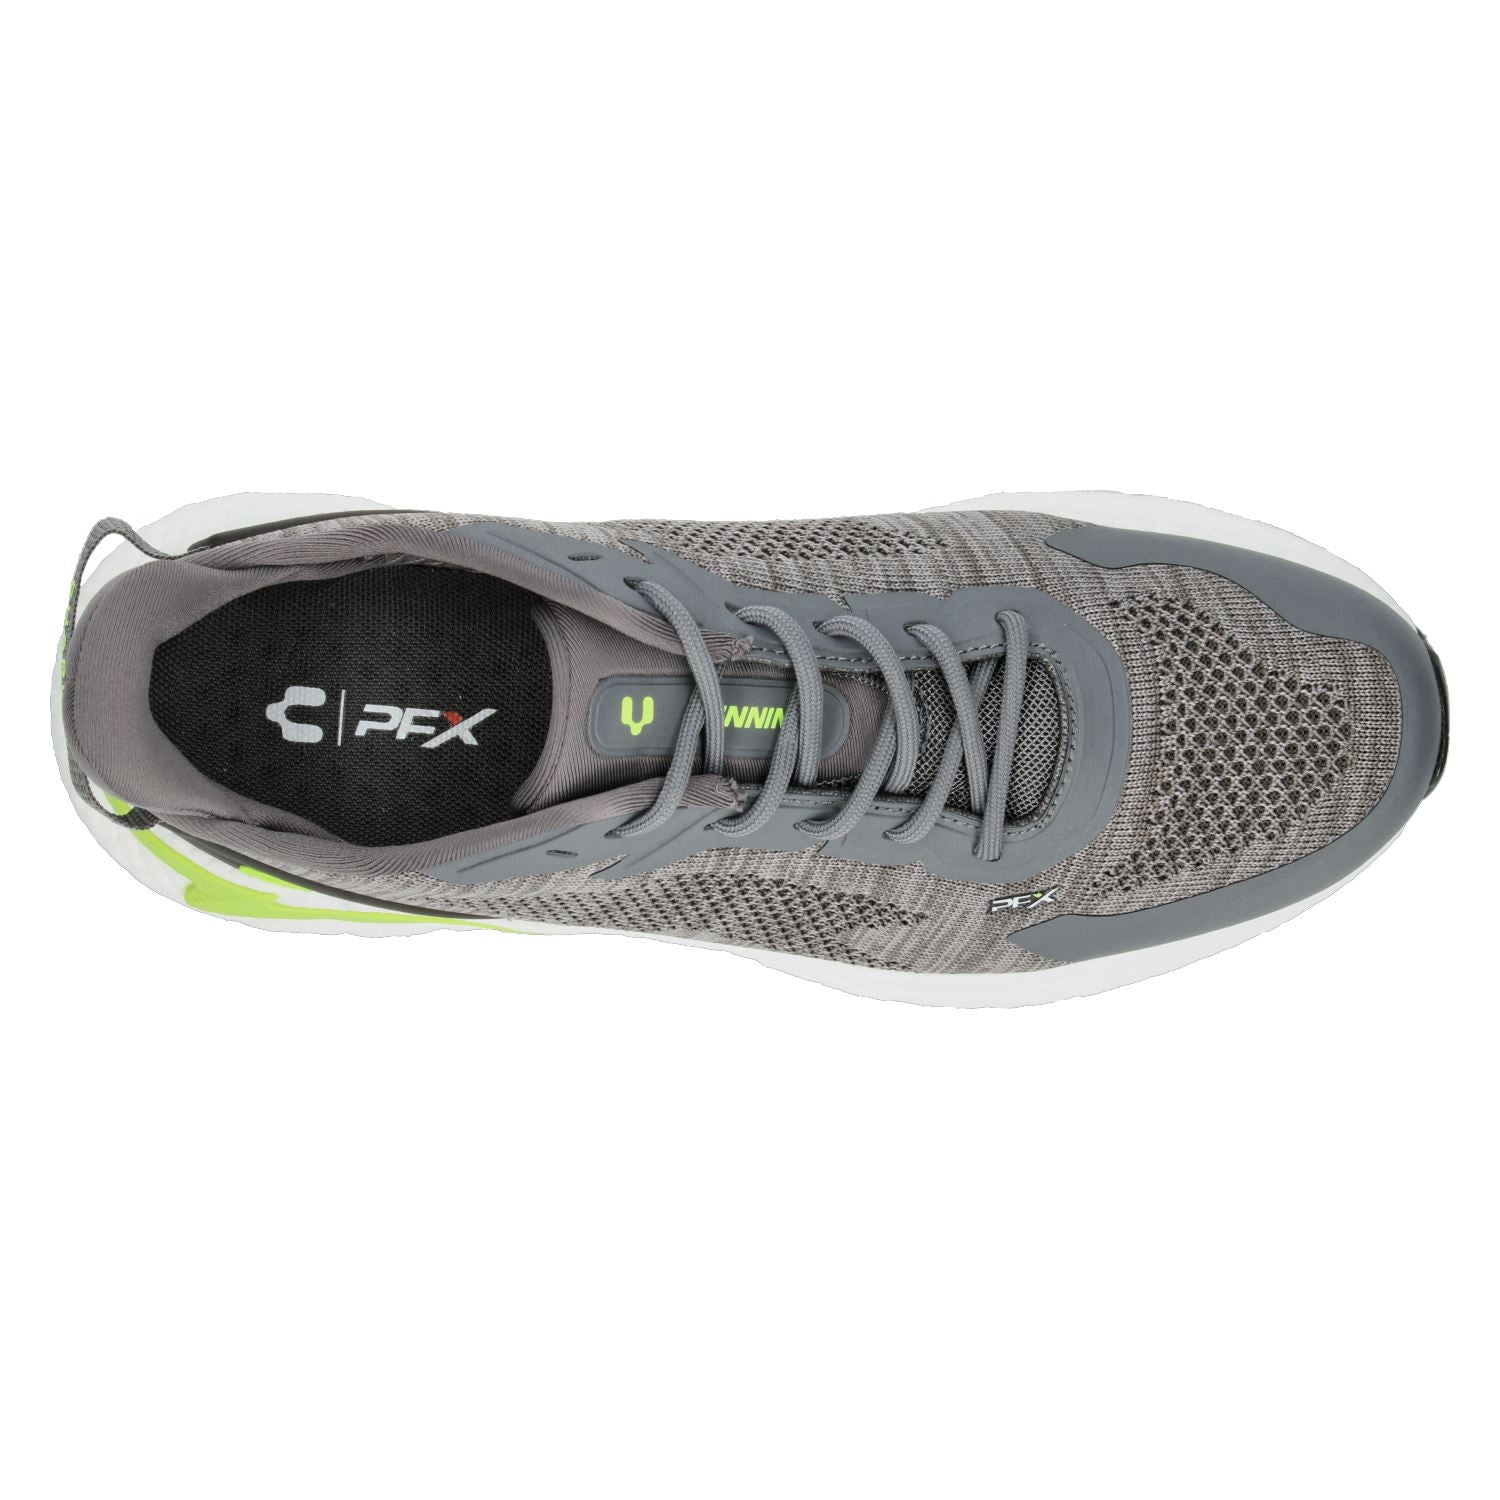 Tenis Charly para Hombre 1086132001 Gris [CHY3330] CHARLY 